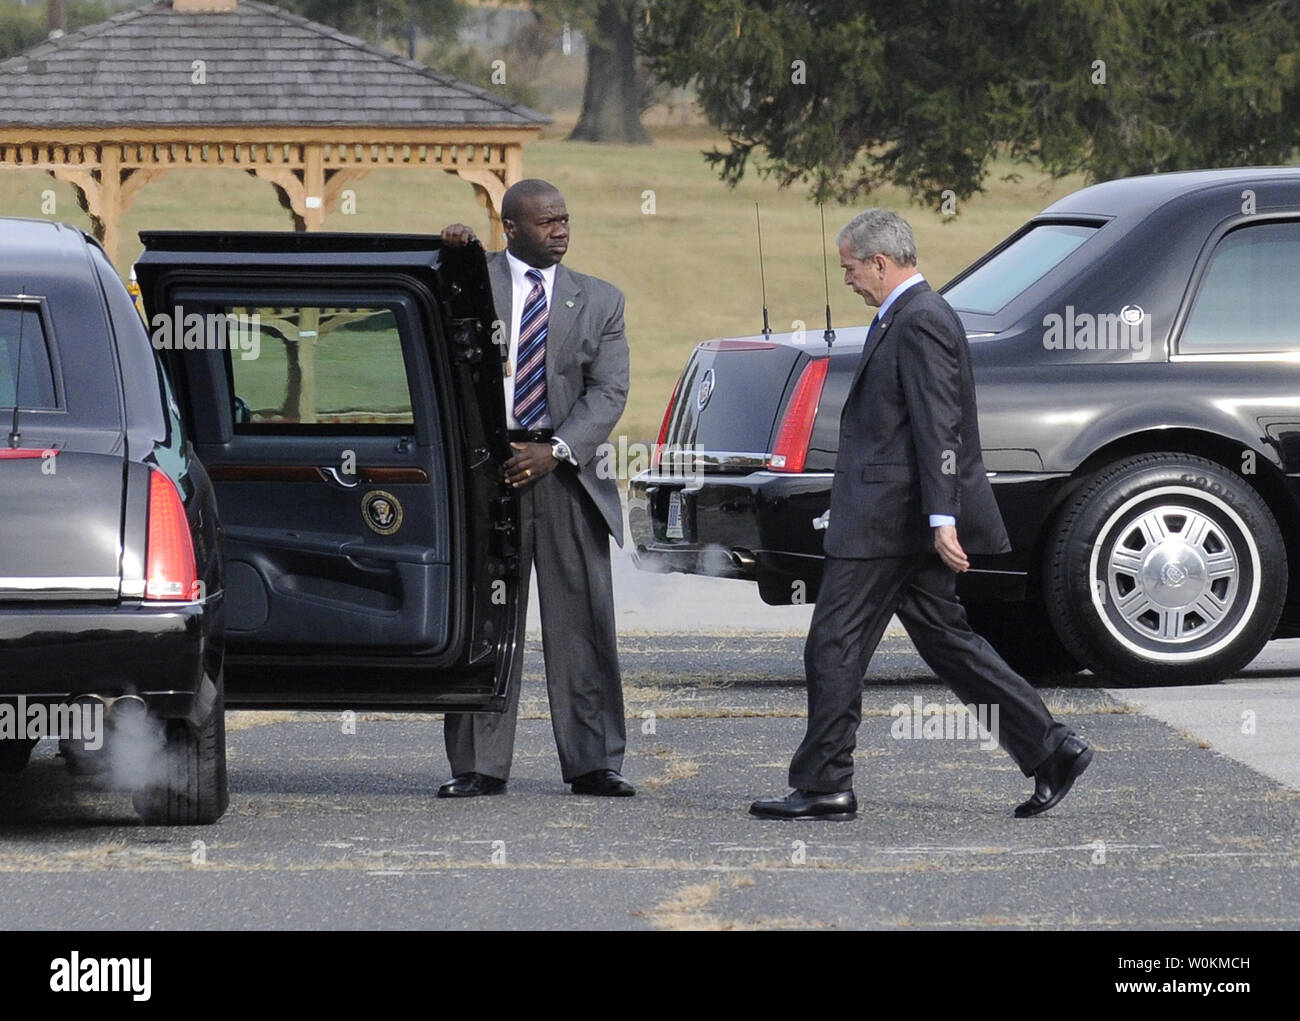 U.S. President George W. Bush walks to his limousine after a closed door intelligence briefing at the National Security Agency in Fort Meade, Maryland on October 24, 2008. (UPI Photo/Yuri Gripas) Stock Photo